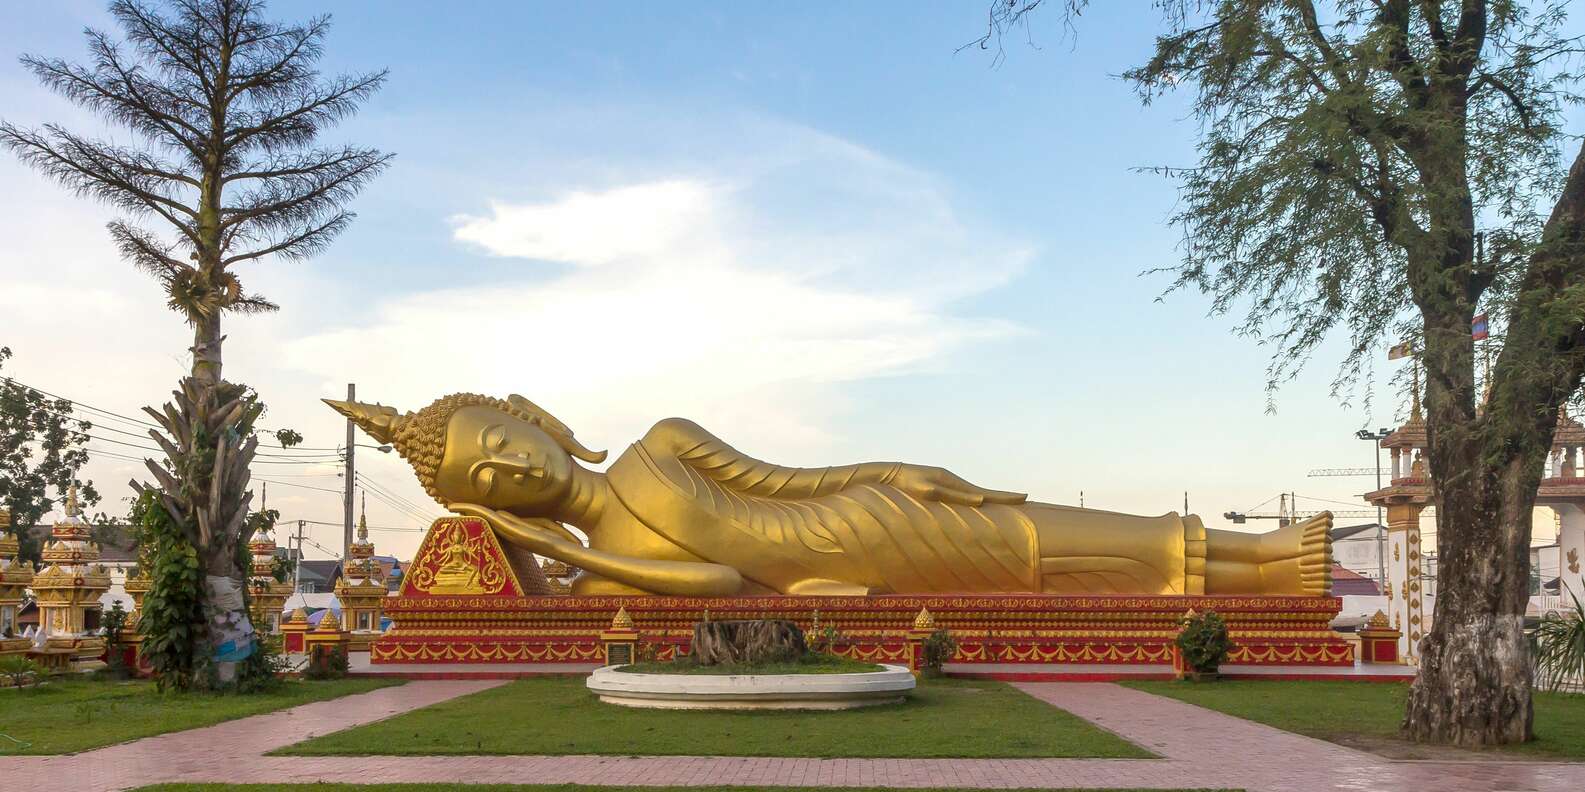 What to do in Vientiane